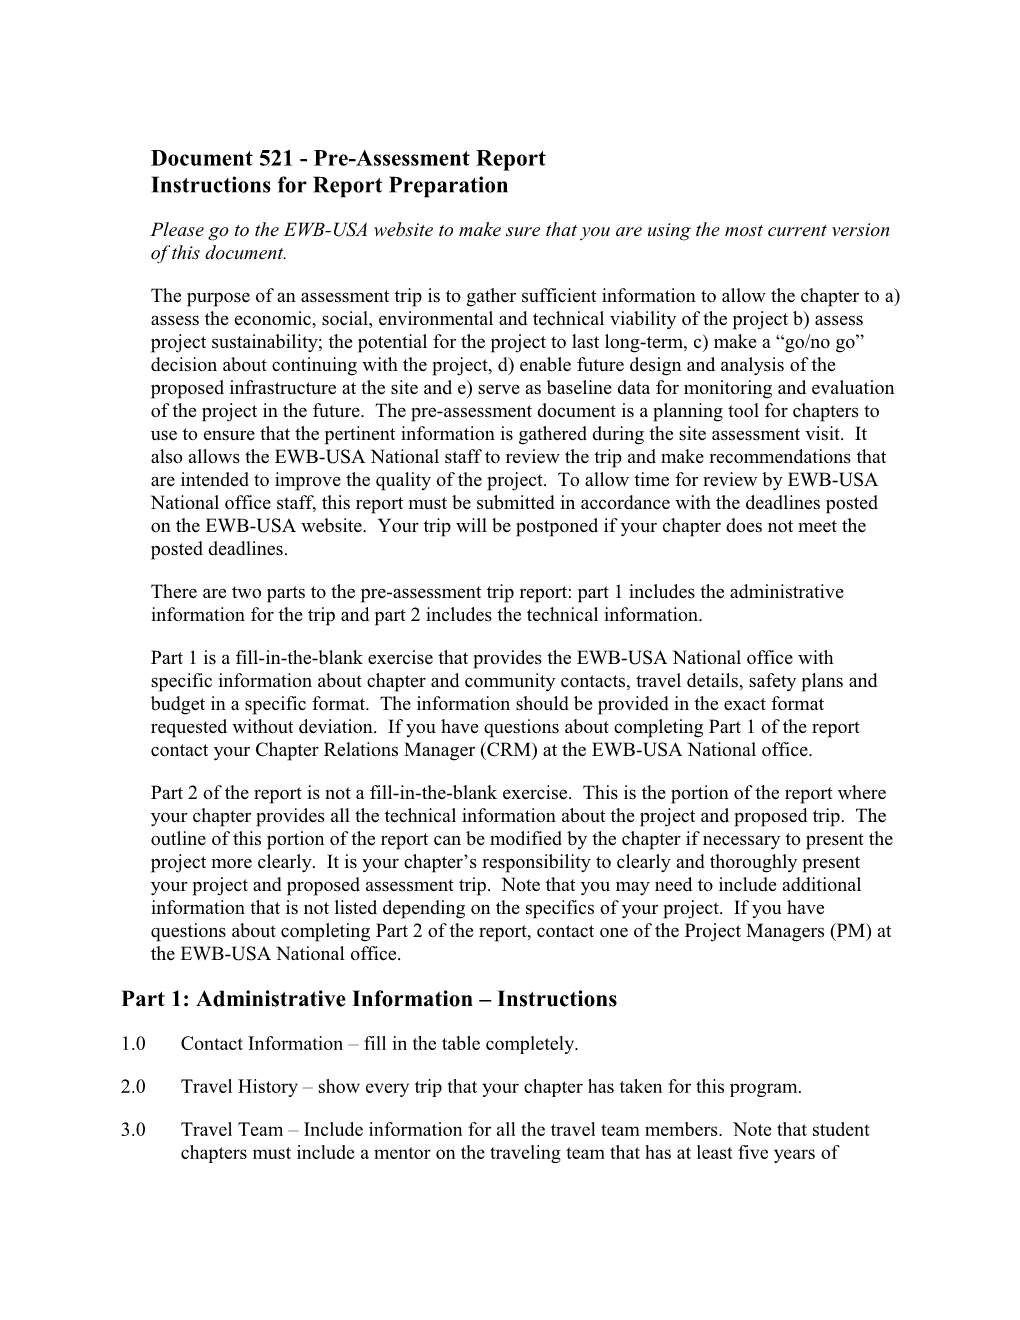 Document 521 - Pre-Assessment Report Instructions for Report Preparation